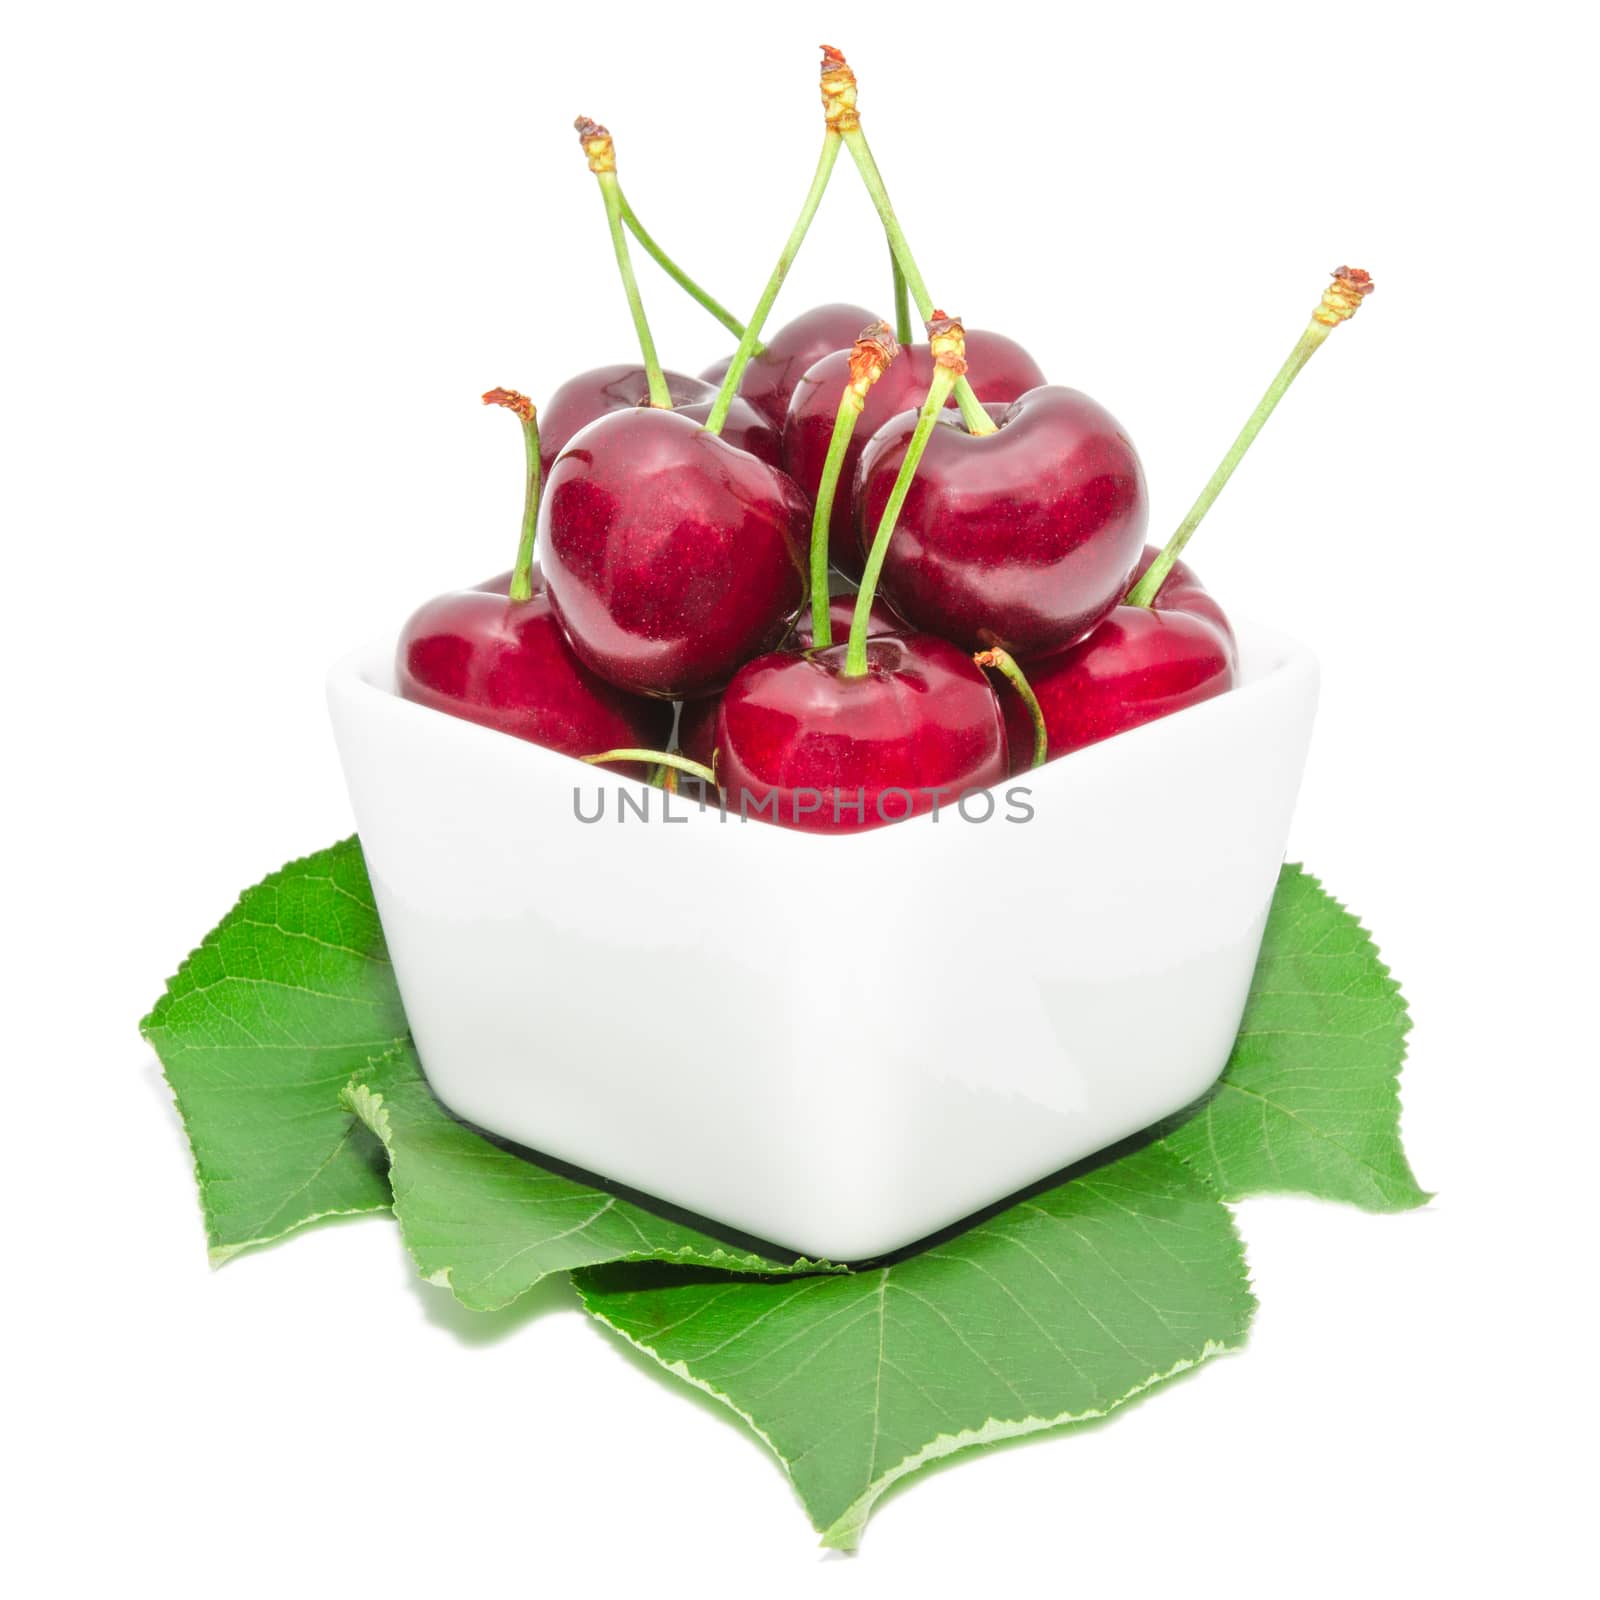 Ripe sweet and juicy tasty cherry berries arranged in small square bowl dish on fresh green leaves isolated